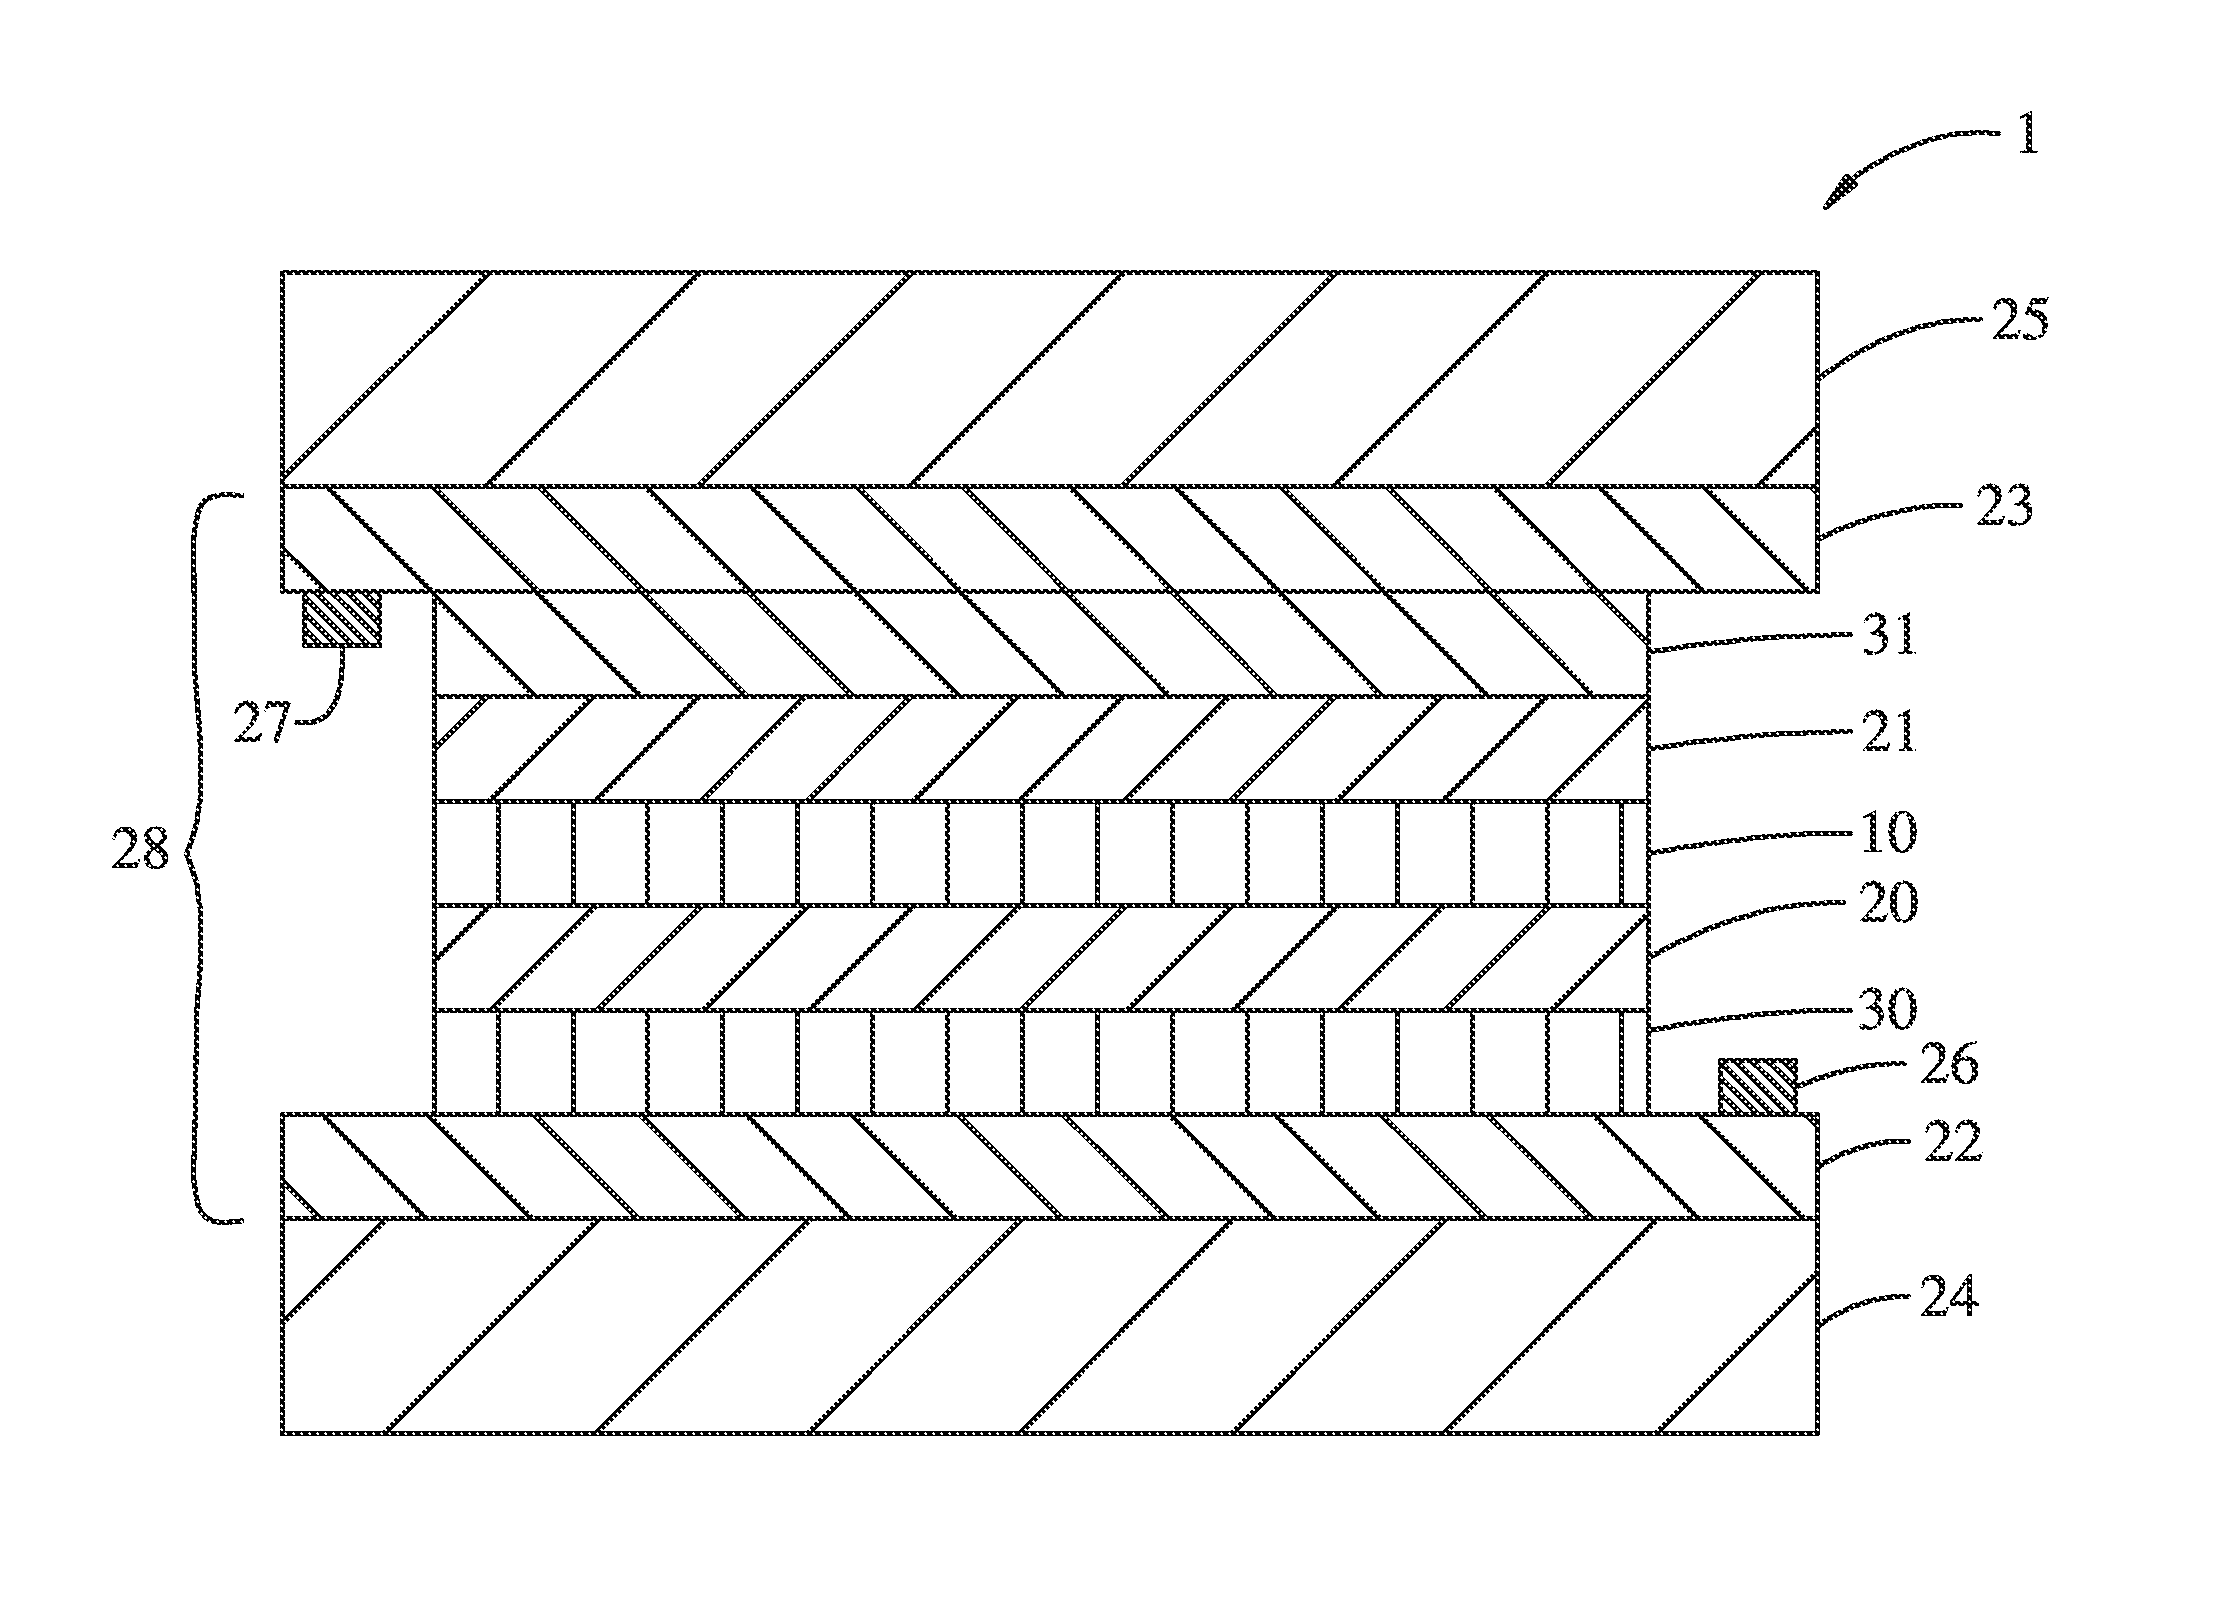 Electrochromic multi-layer devices with current modulating structure